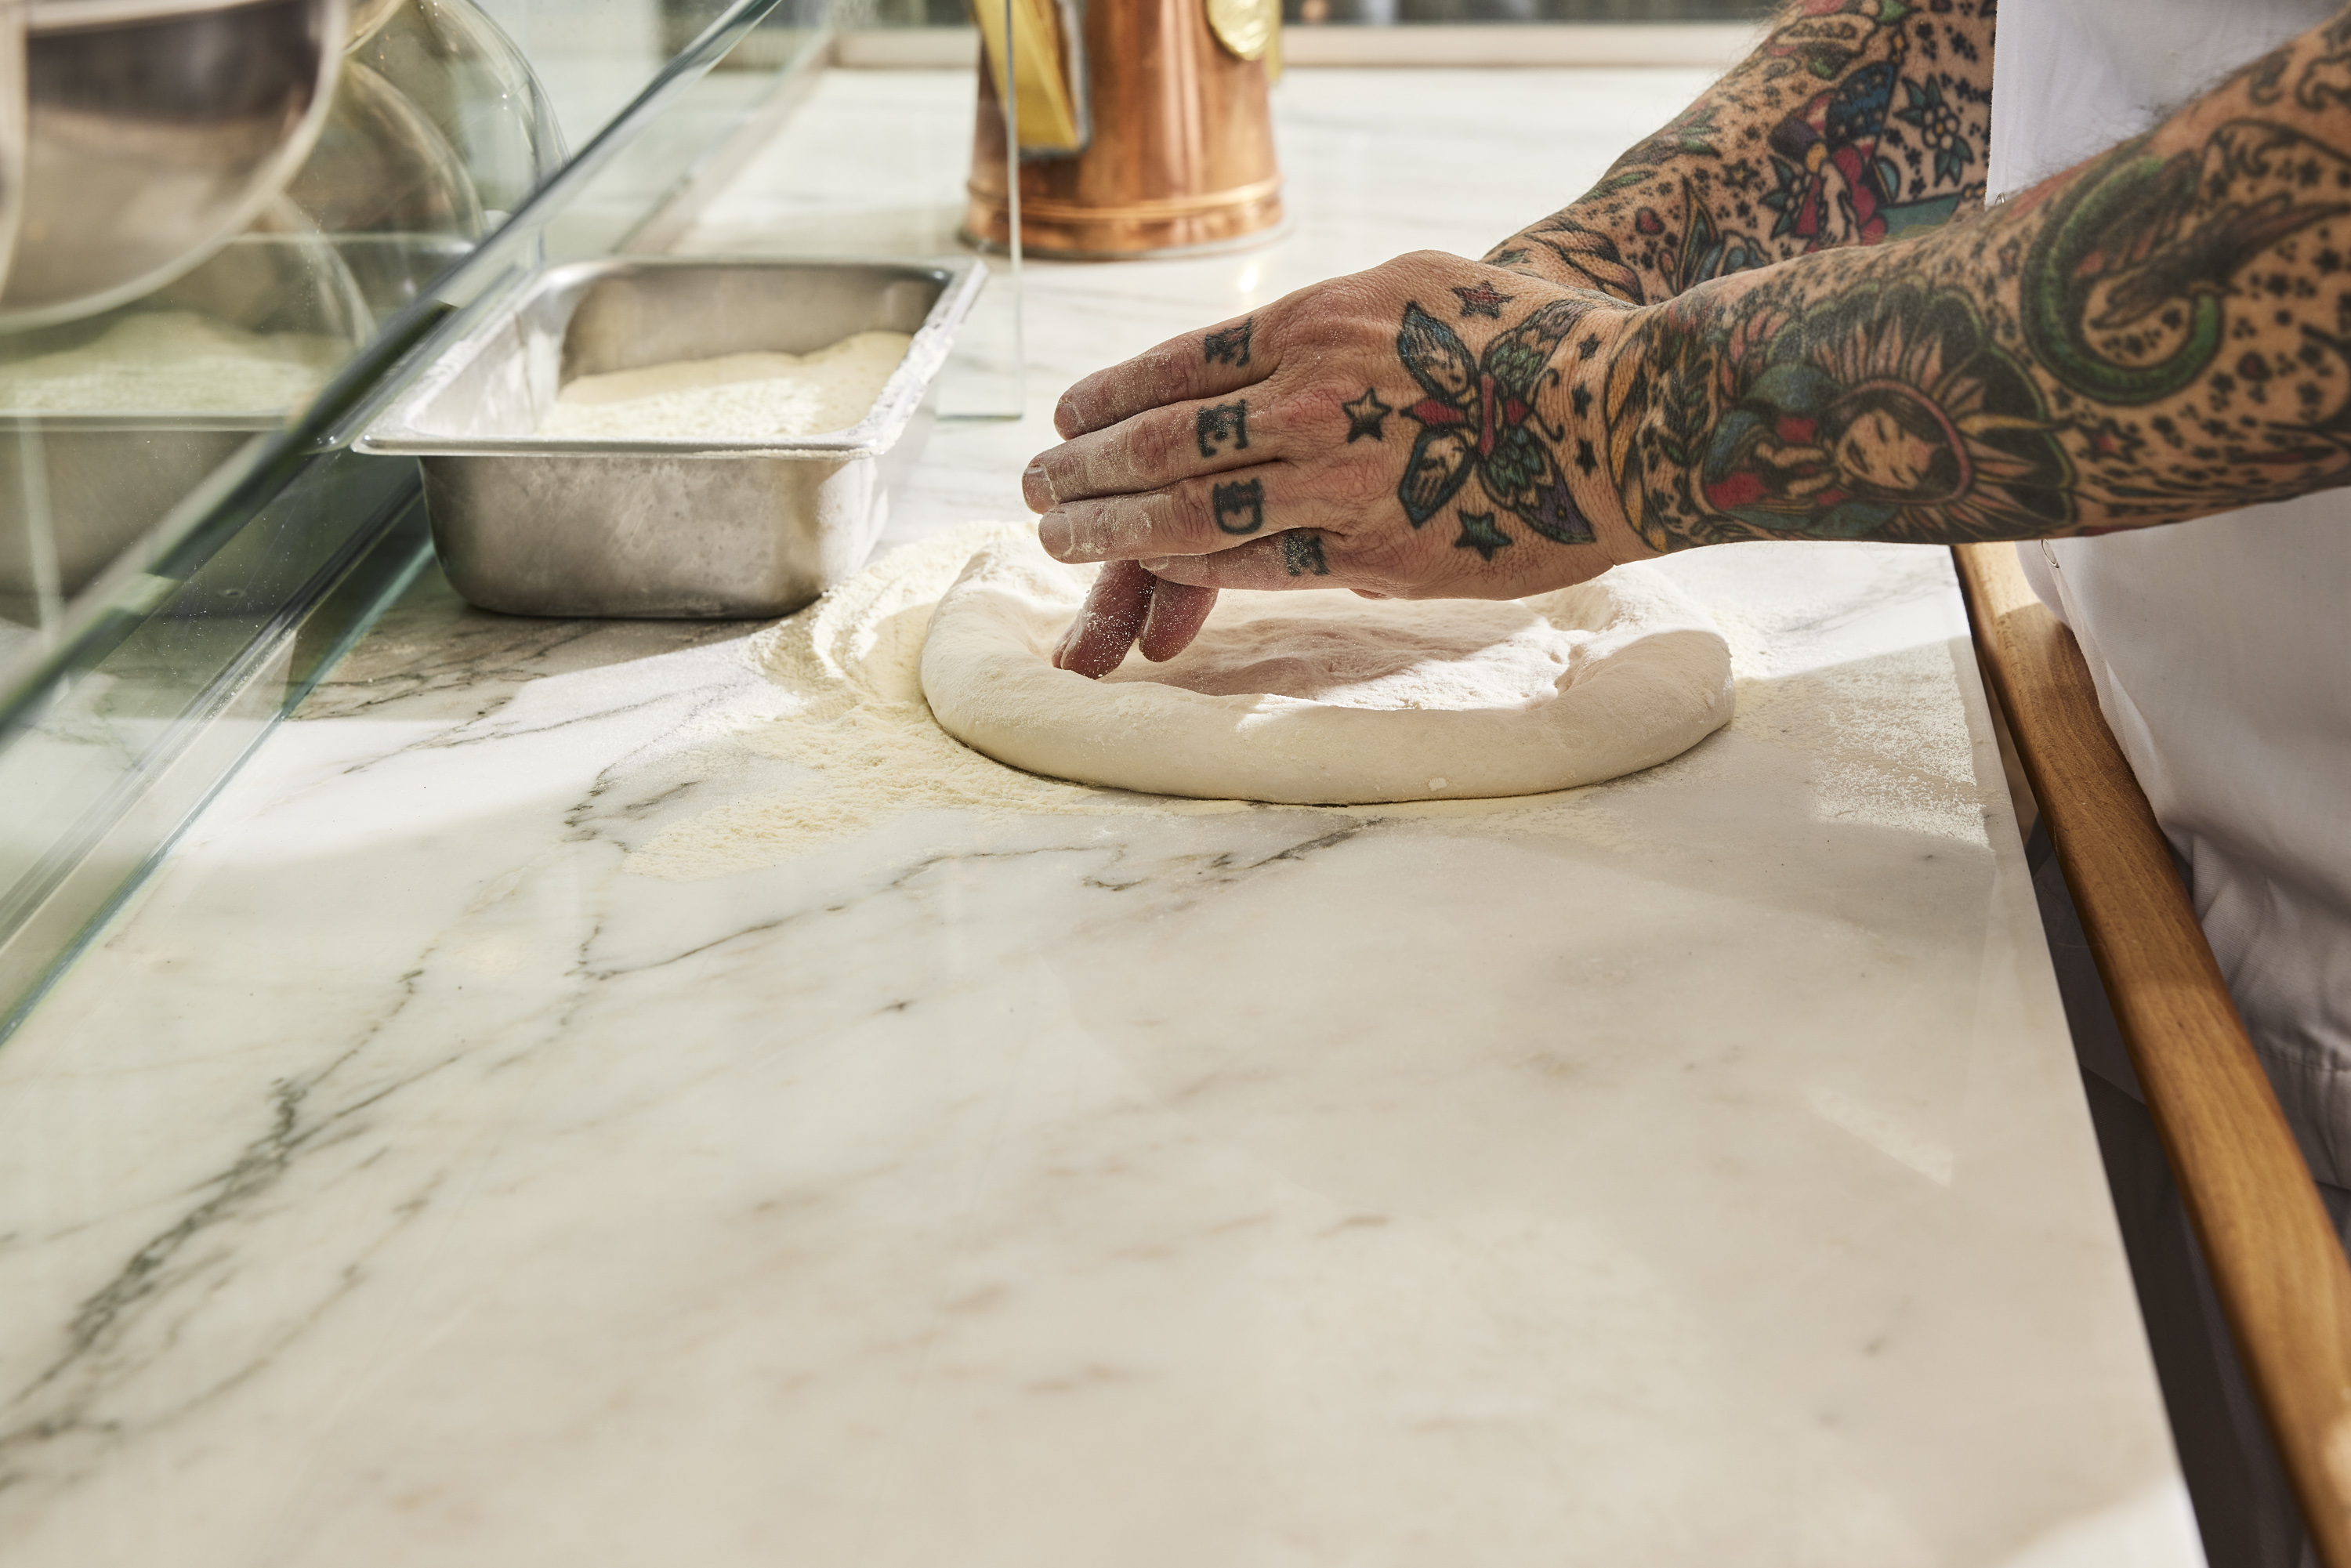 Tattooed hands massage a ball of pizza dough on a marbled counter.